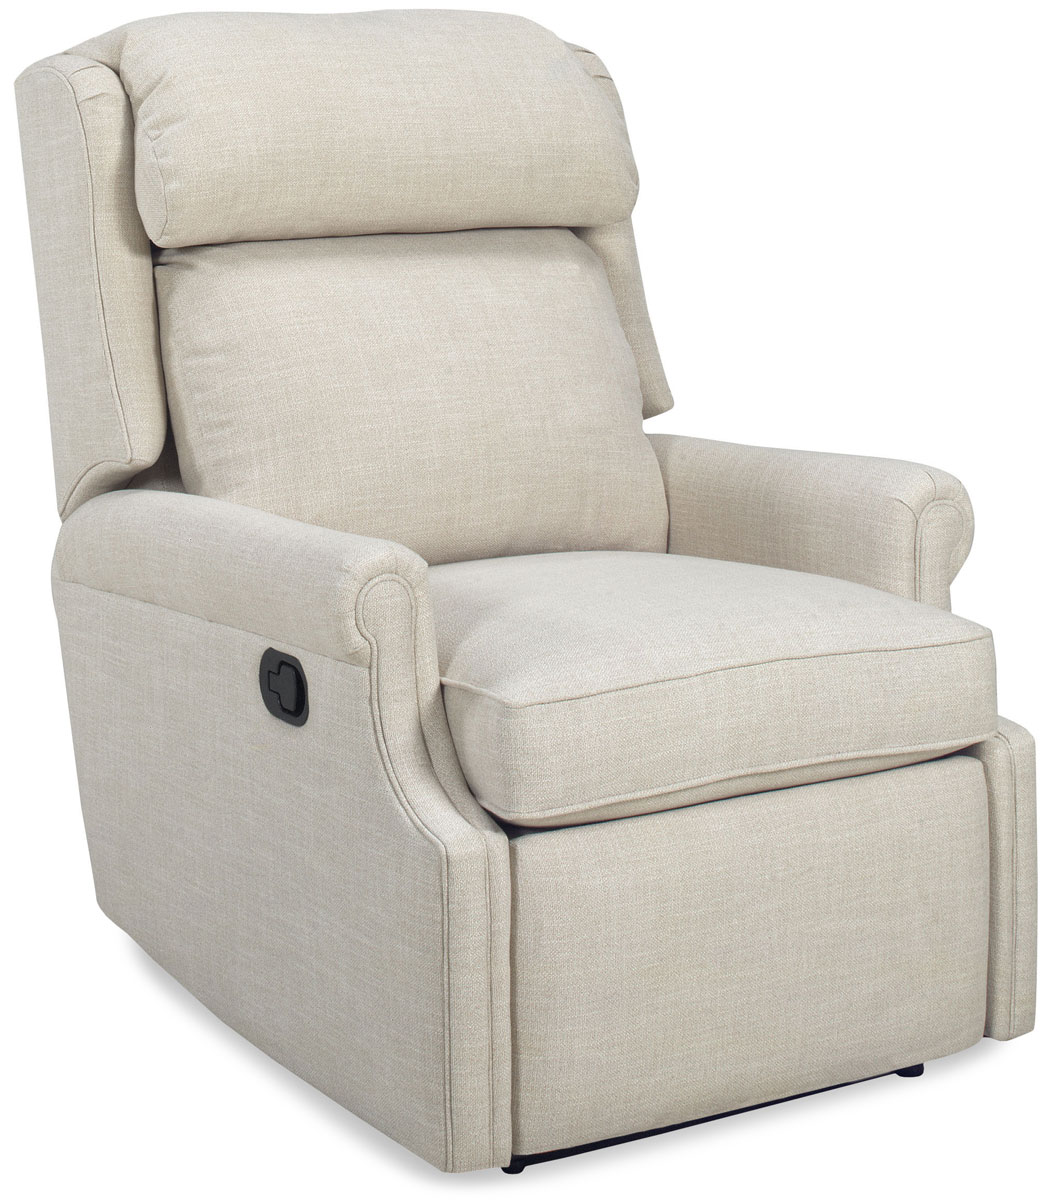 Temple Furniture 29007-PS Maverick Recliner with Panel Scoop Arm